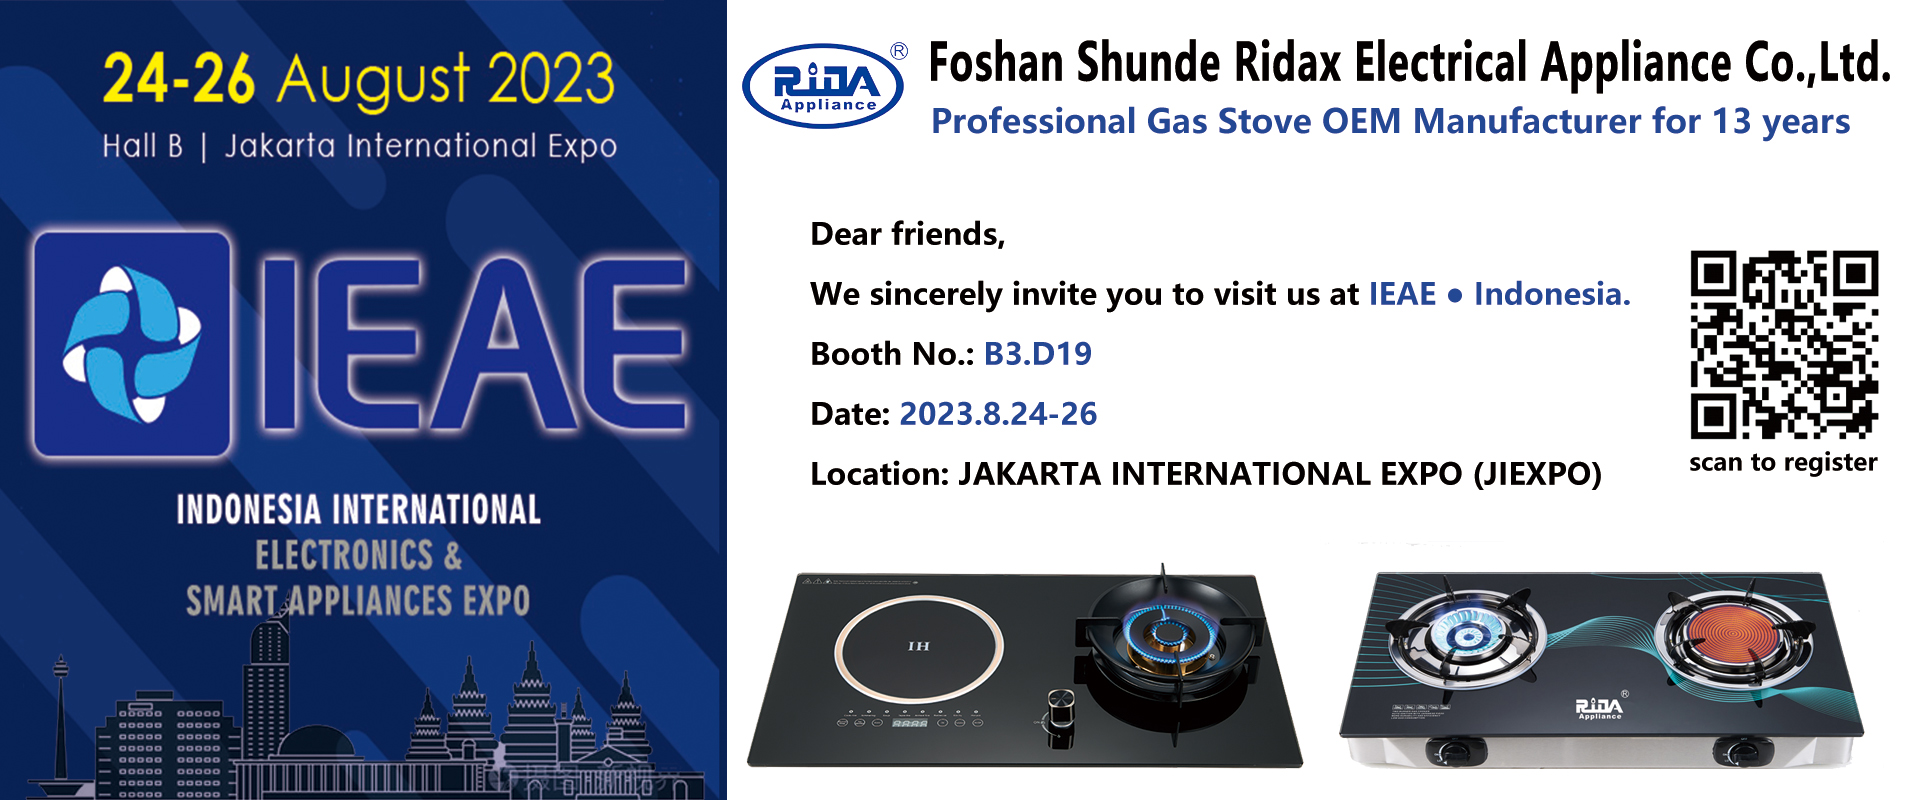 Gas Cooktops, Stove Cooker, Gas Cooktop Stove - Ridax